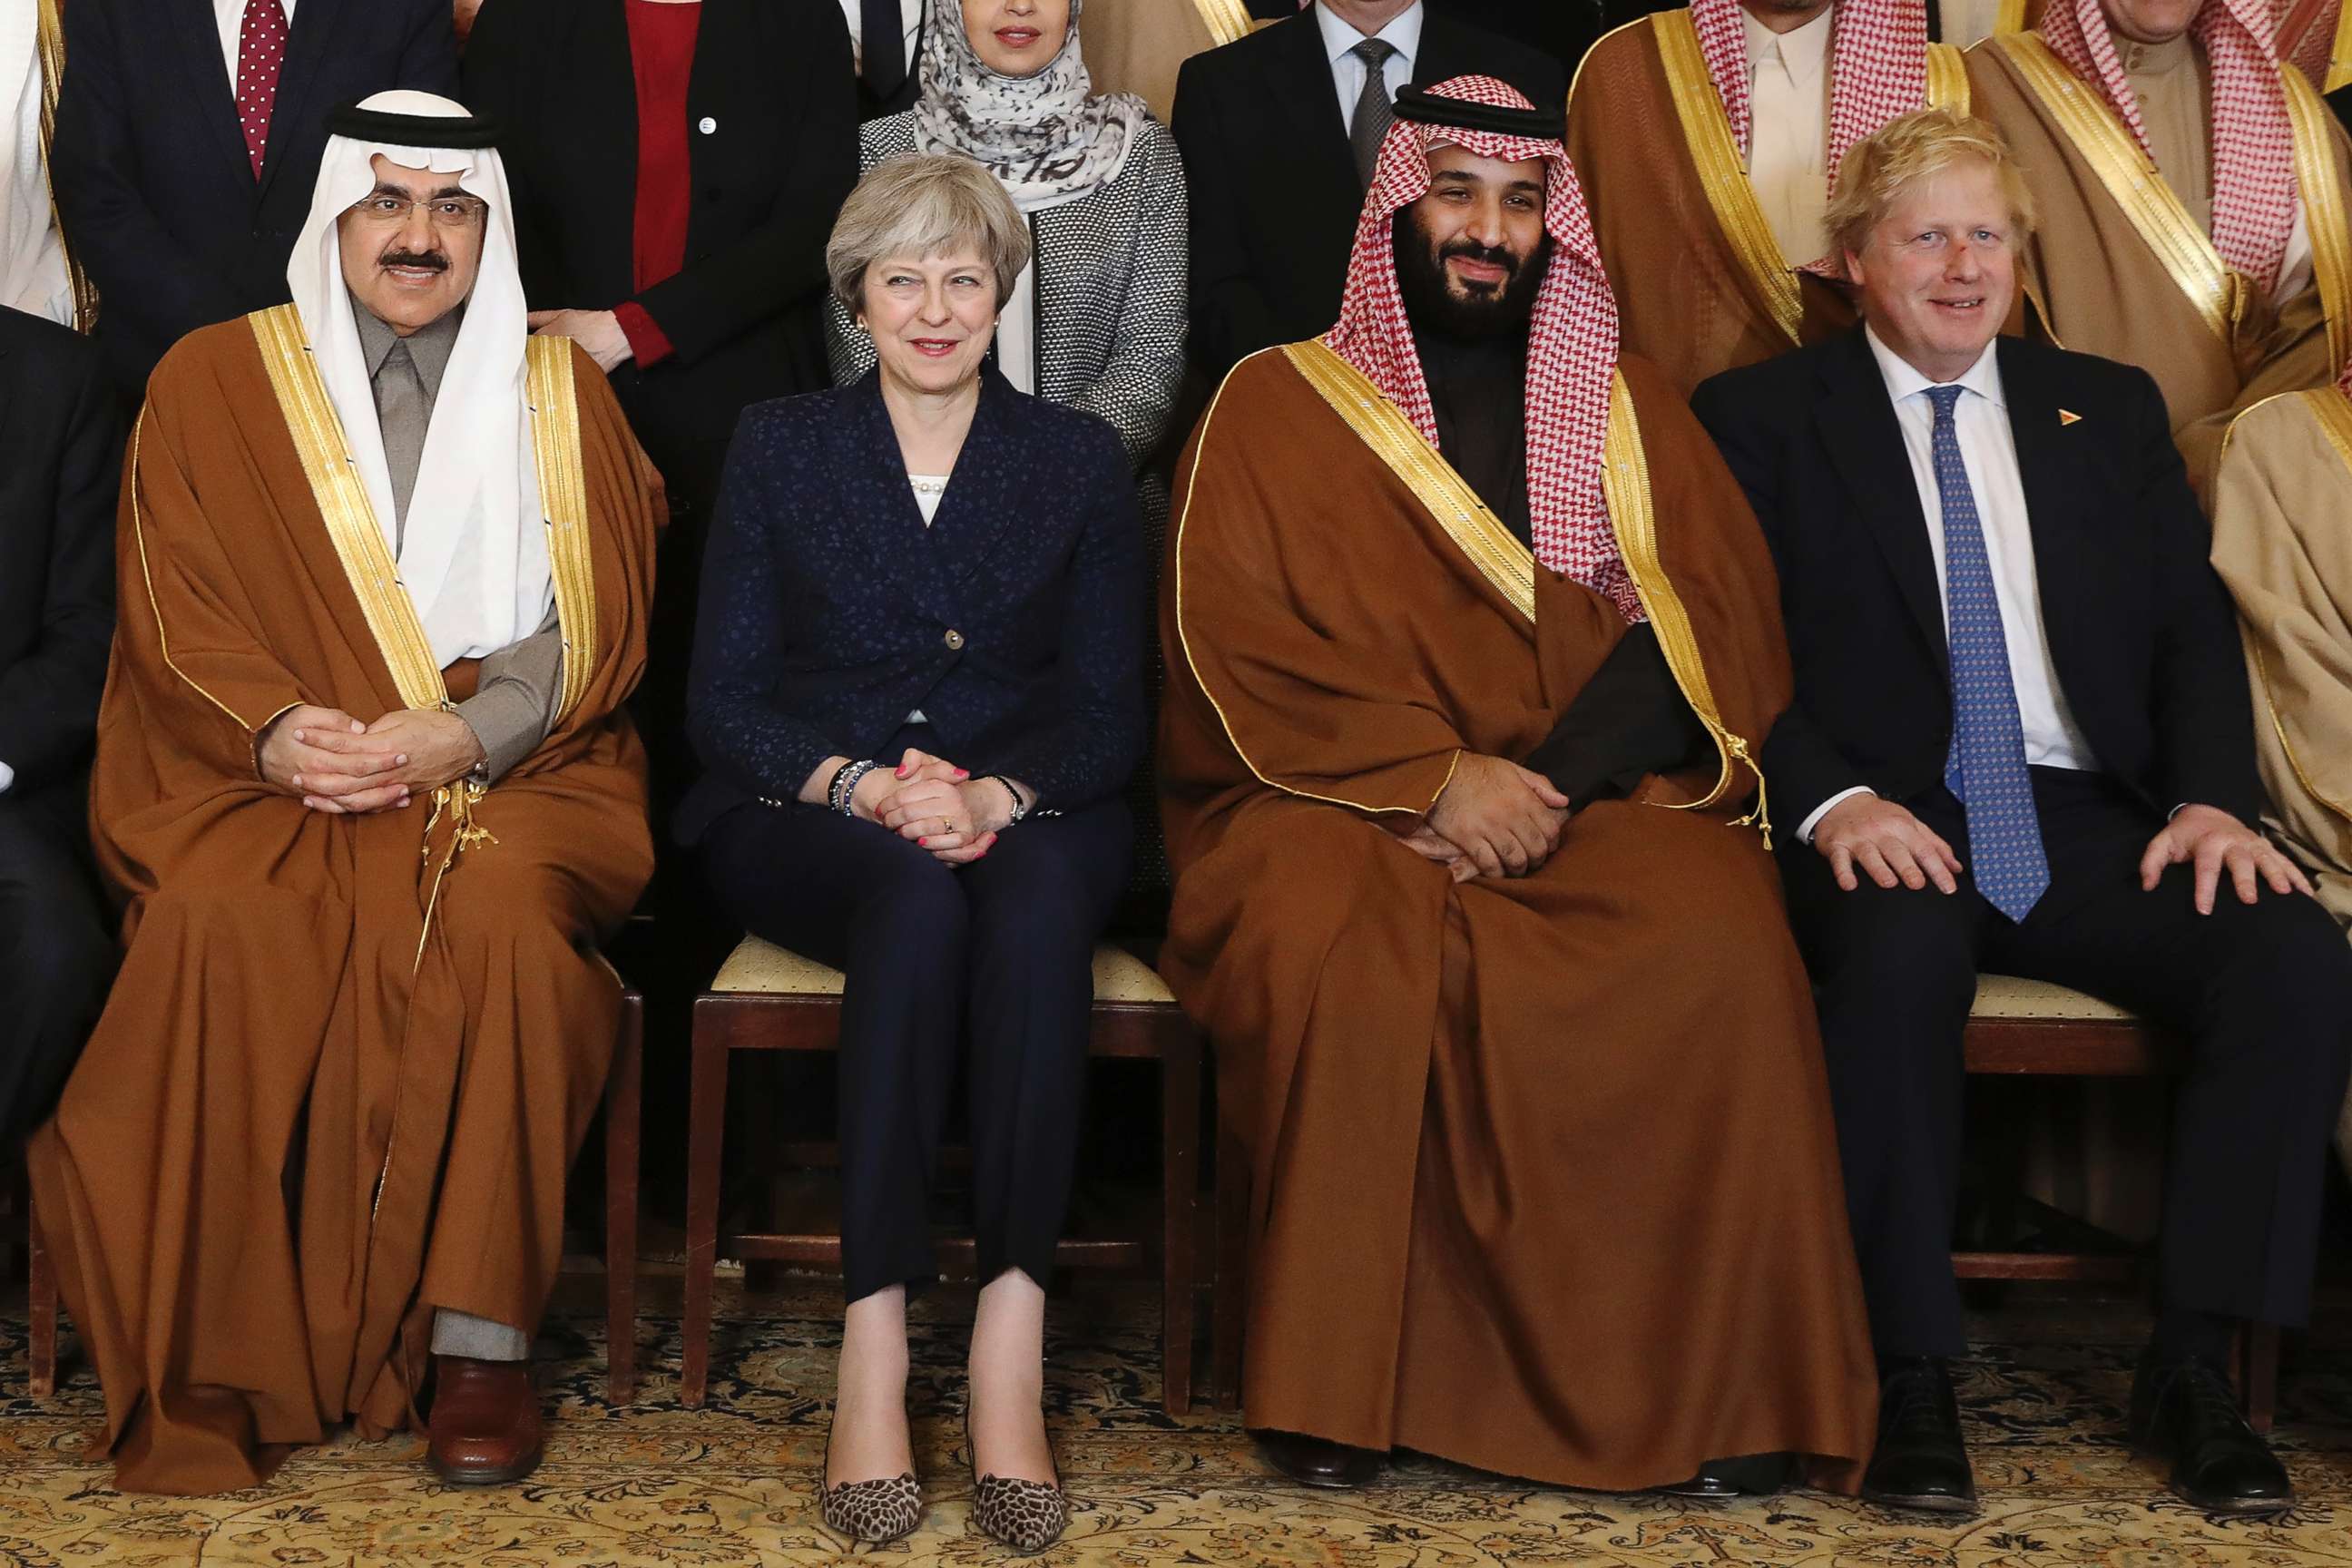 PHOTO: Britain's Prime Minister Theresa May, 2nd left, sits with Saudi Crown Prince Mohammed bin Salman, 2nd right, and other members of the British government and Saudi ministers and delegates inside 10 Downing Street in London, March 7, 2018.